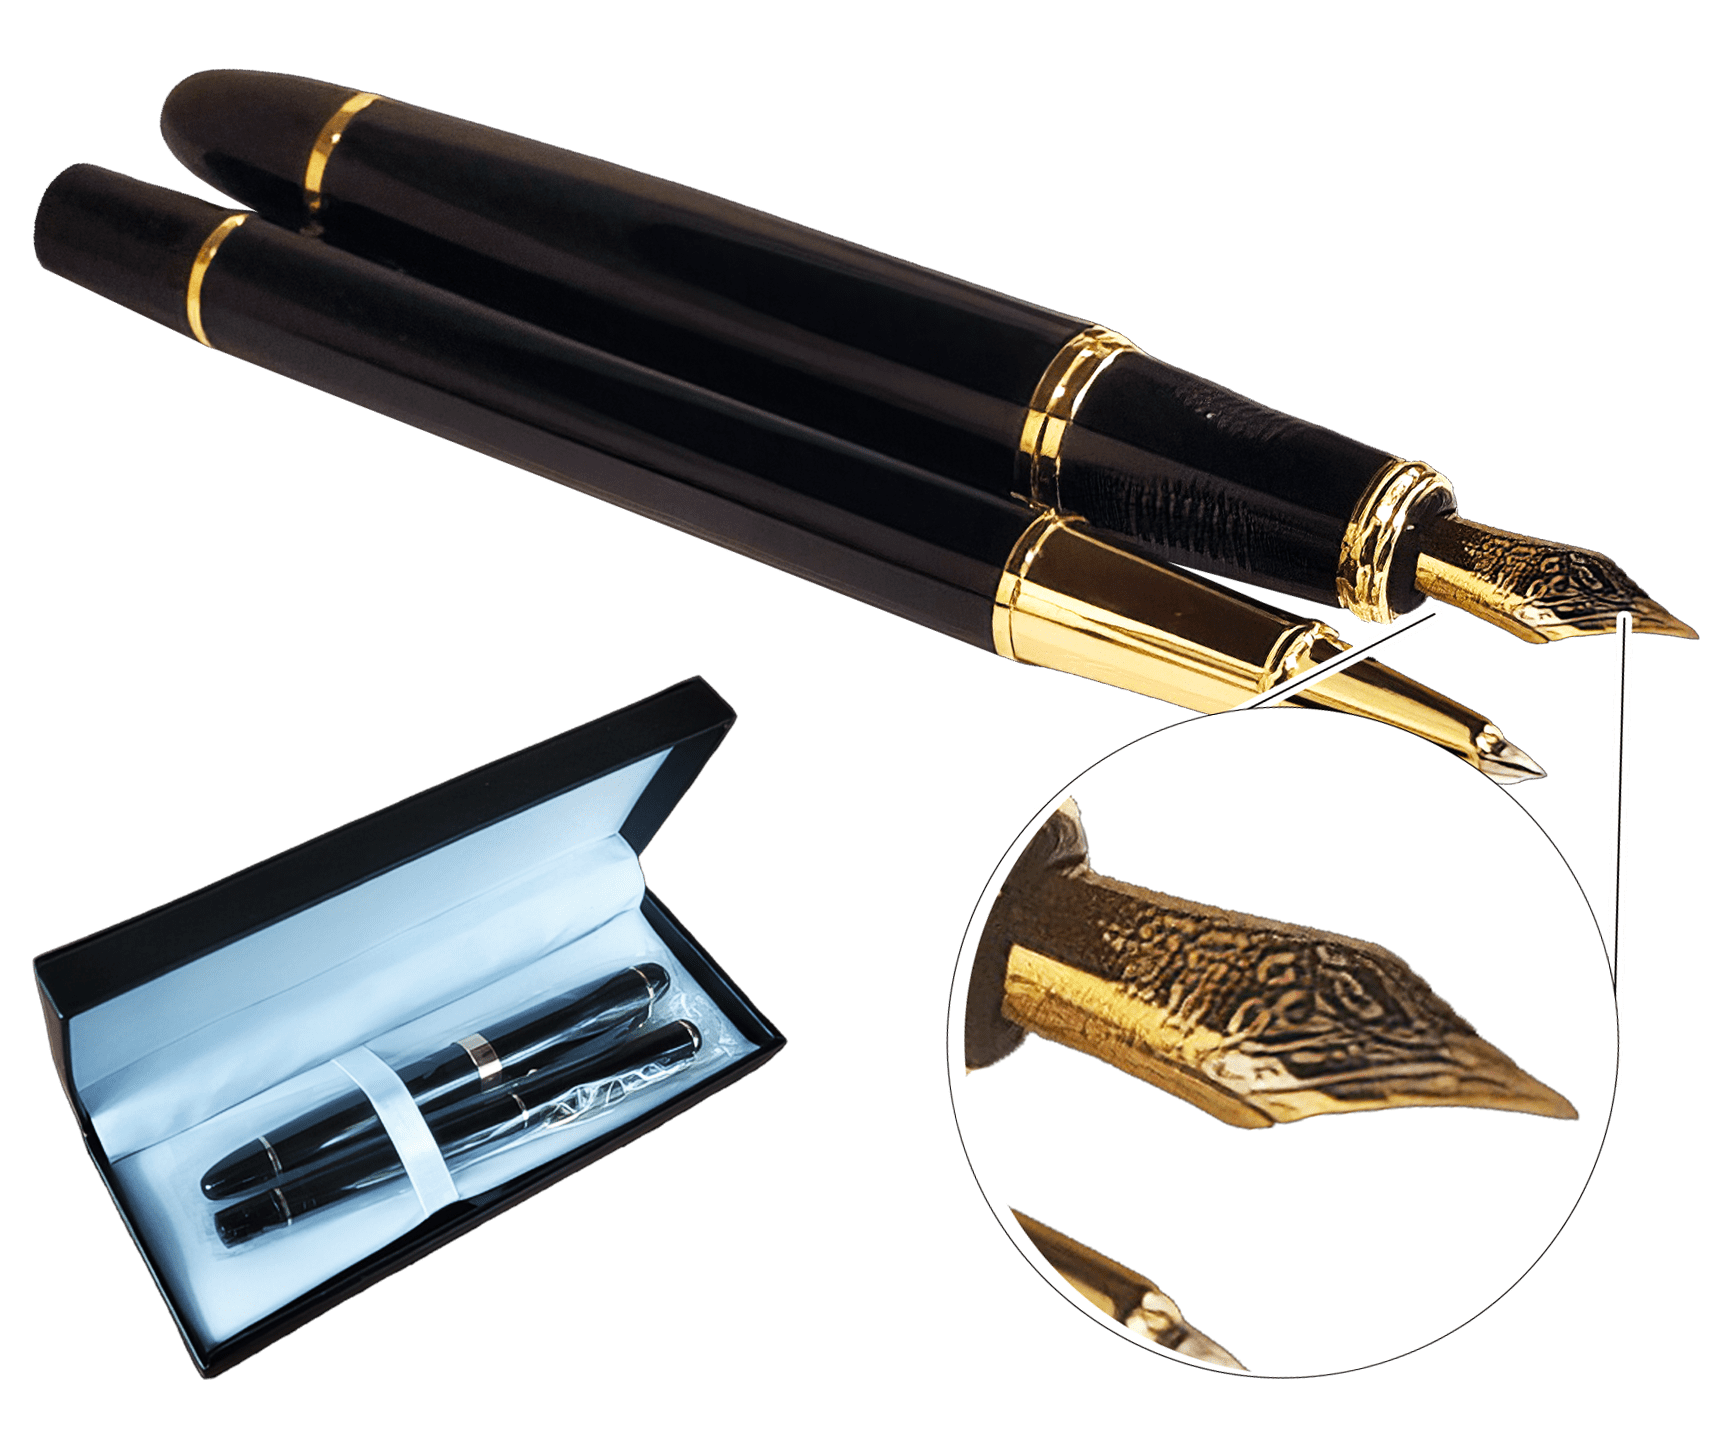 services/engraving/pens/Soyl96Vf1ckMZW.png